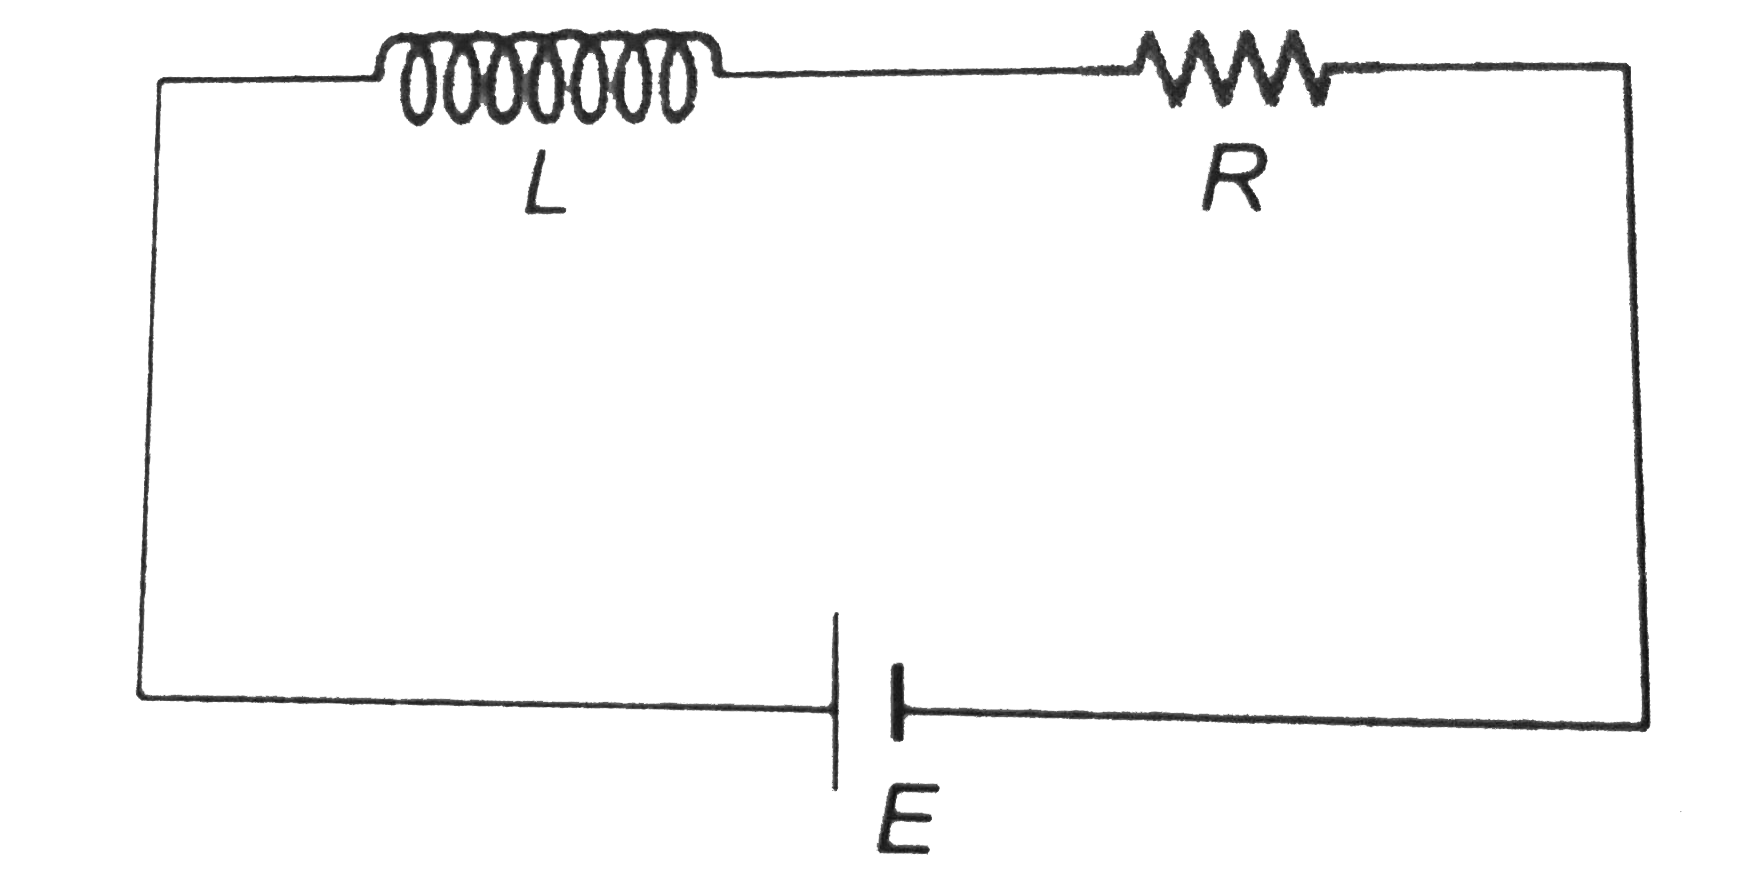 A battery of emf E and of negligible internal resistance is connected in a L-R circuit as shown in figure. The inductor has a piece of soft iron inside it. When steady state is reached in the piece of soft iron is abruptly pulled out suddenly so that the inductance of the inductor decreases to nL with nlt1 with battery remaining connected. Calculate.     a. Current as a function of time assuming t=0 at the instant when piece is pulled.   b. the work done to pull out the piece.   c. thermal power generated in the circuit as as function of time.   d. power supplied by the battery as a function of time.    HOW TO PROCEED When the inductance of an inductor is abruptly changed, the flux passing through it remains constant.   phi = constant   :. Li = constant (L = (phi)/(i))